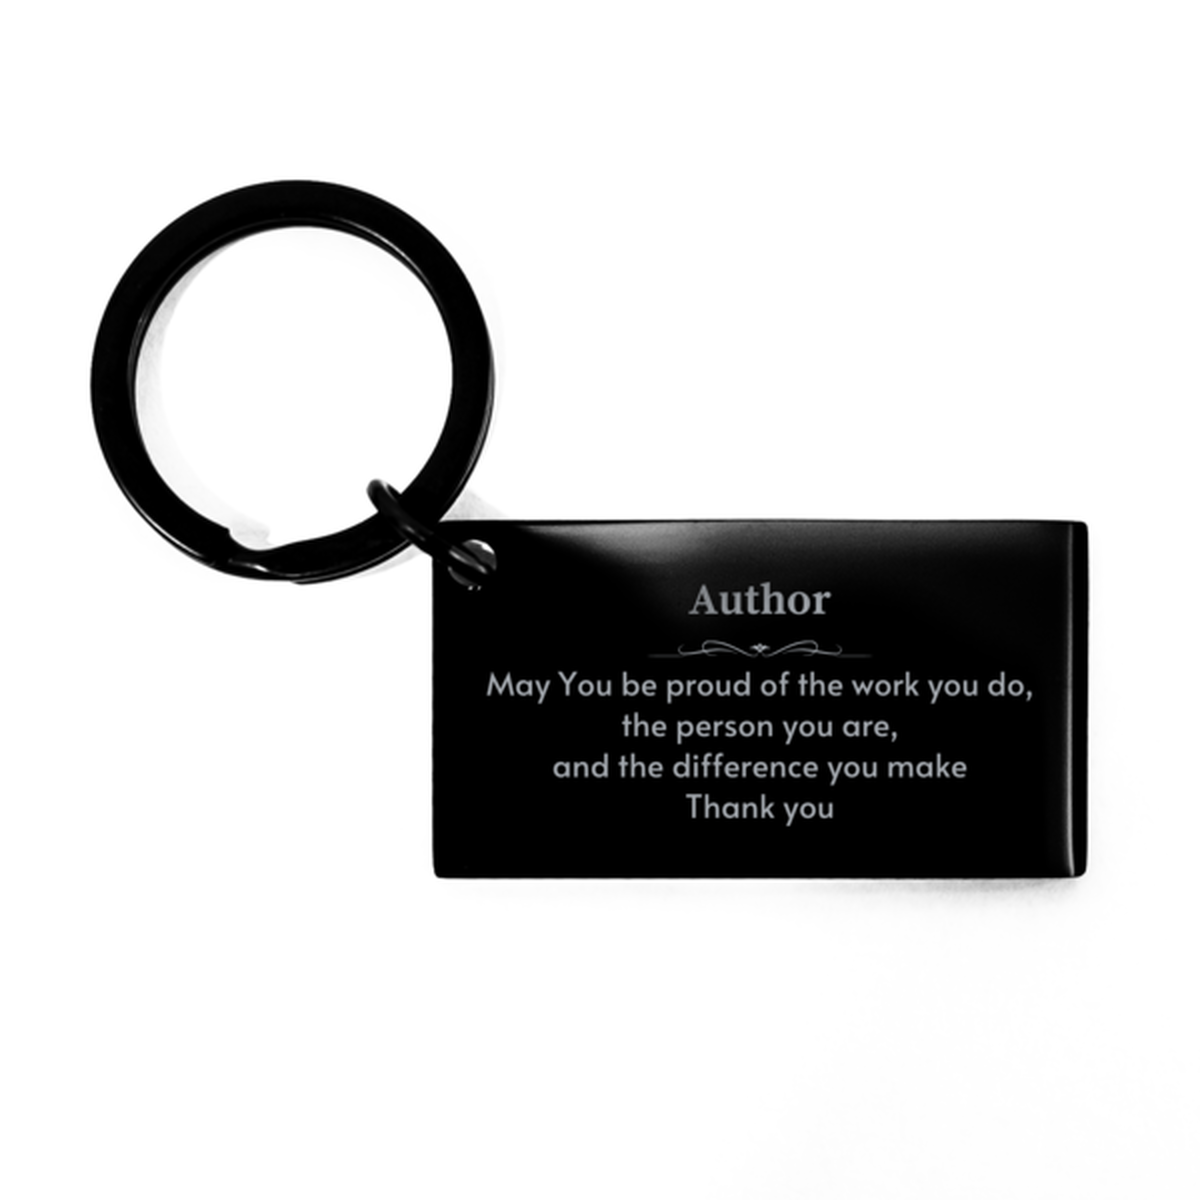 Heartwarming Keychain Retirement Coworkers Gifts for Author, Court Clerk May You be proud of the work you do, the person you are Gifts for Boss Men Women Friends